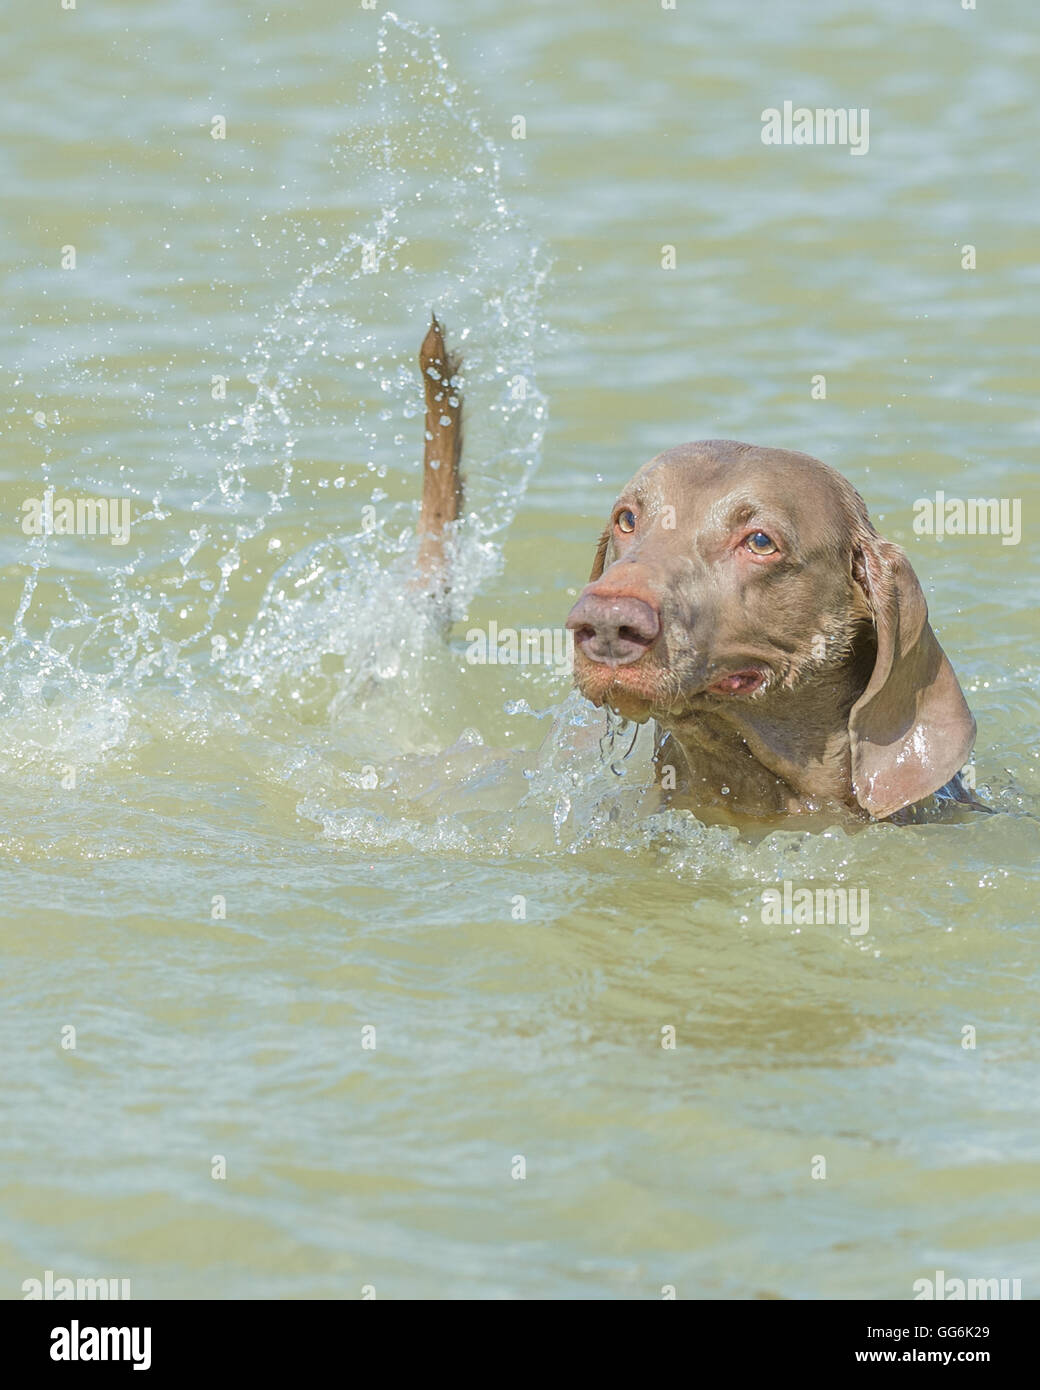 A Weimaraner dog swimming playing and splashing in water on a summers day Stock Photo